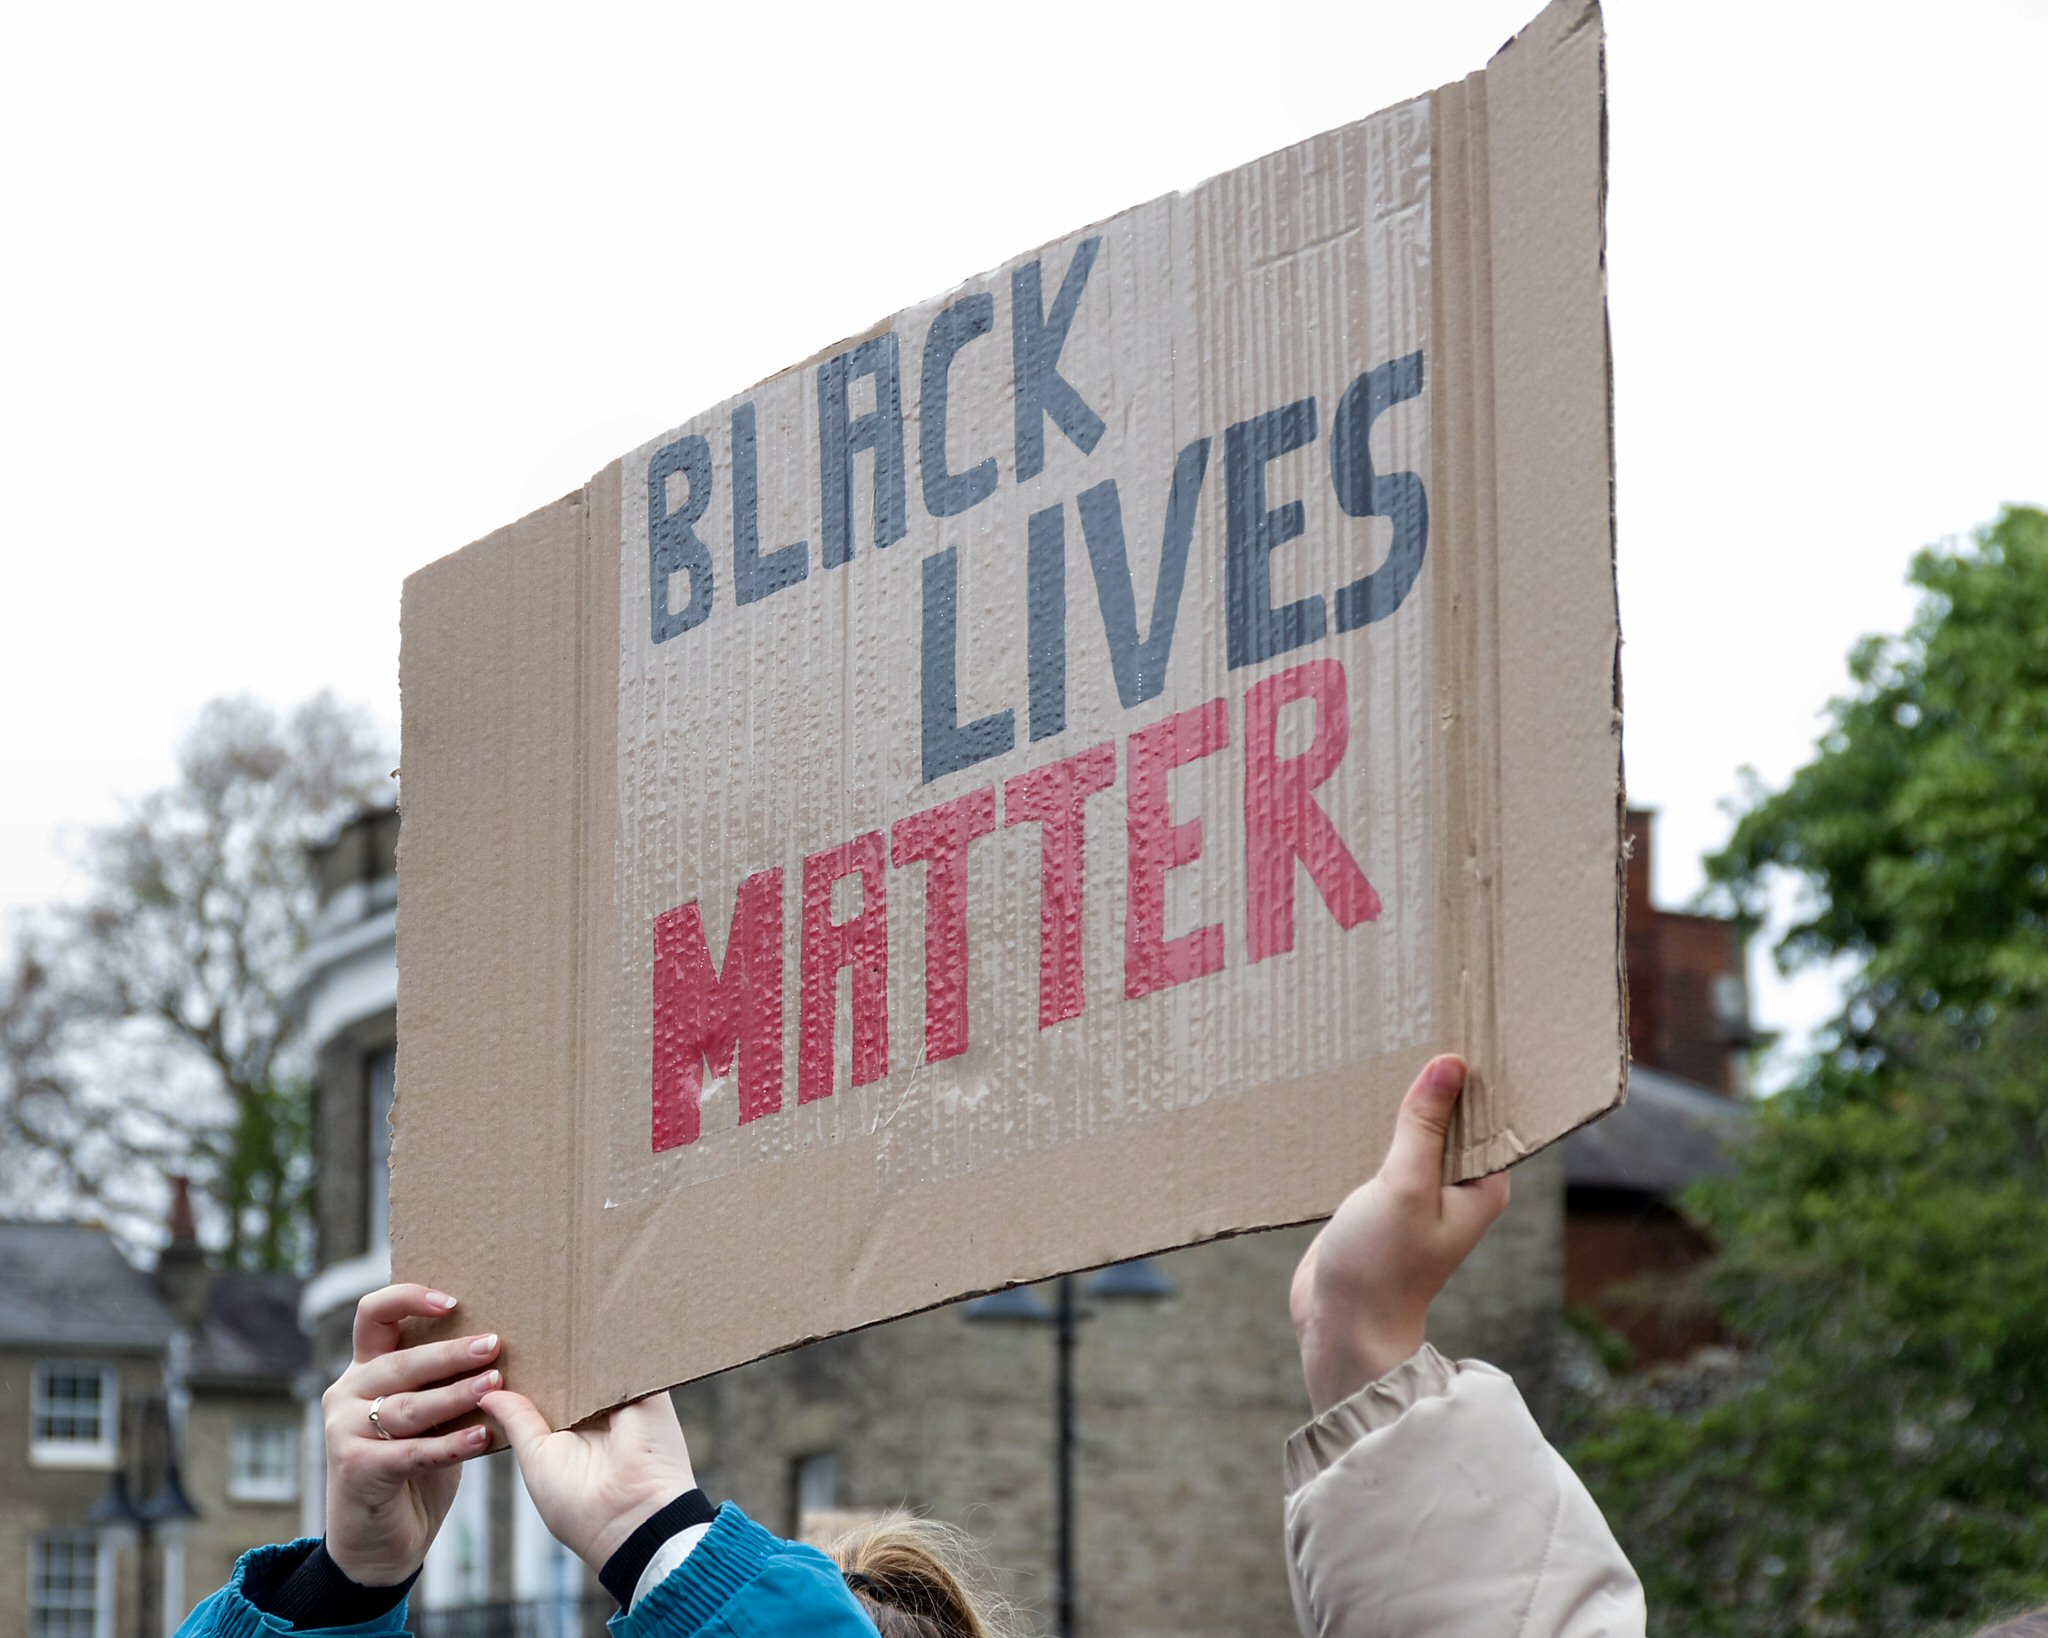 Black Lives Matter is written on a cardboard sign and held up in the air by a pair of white hands.